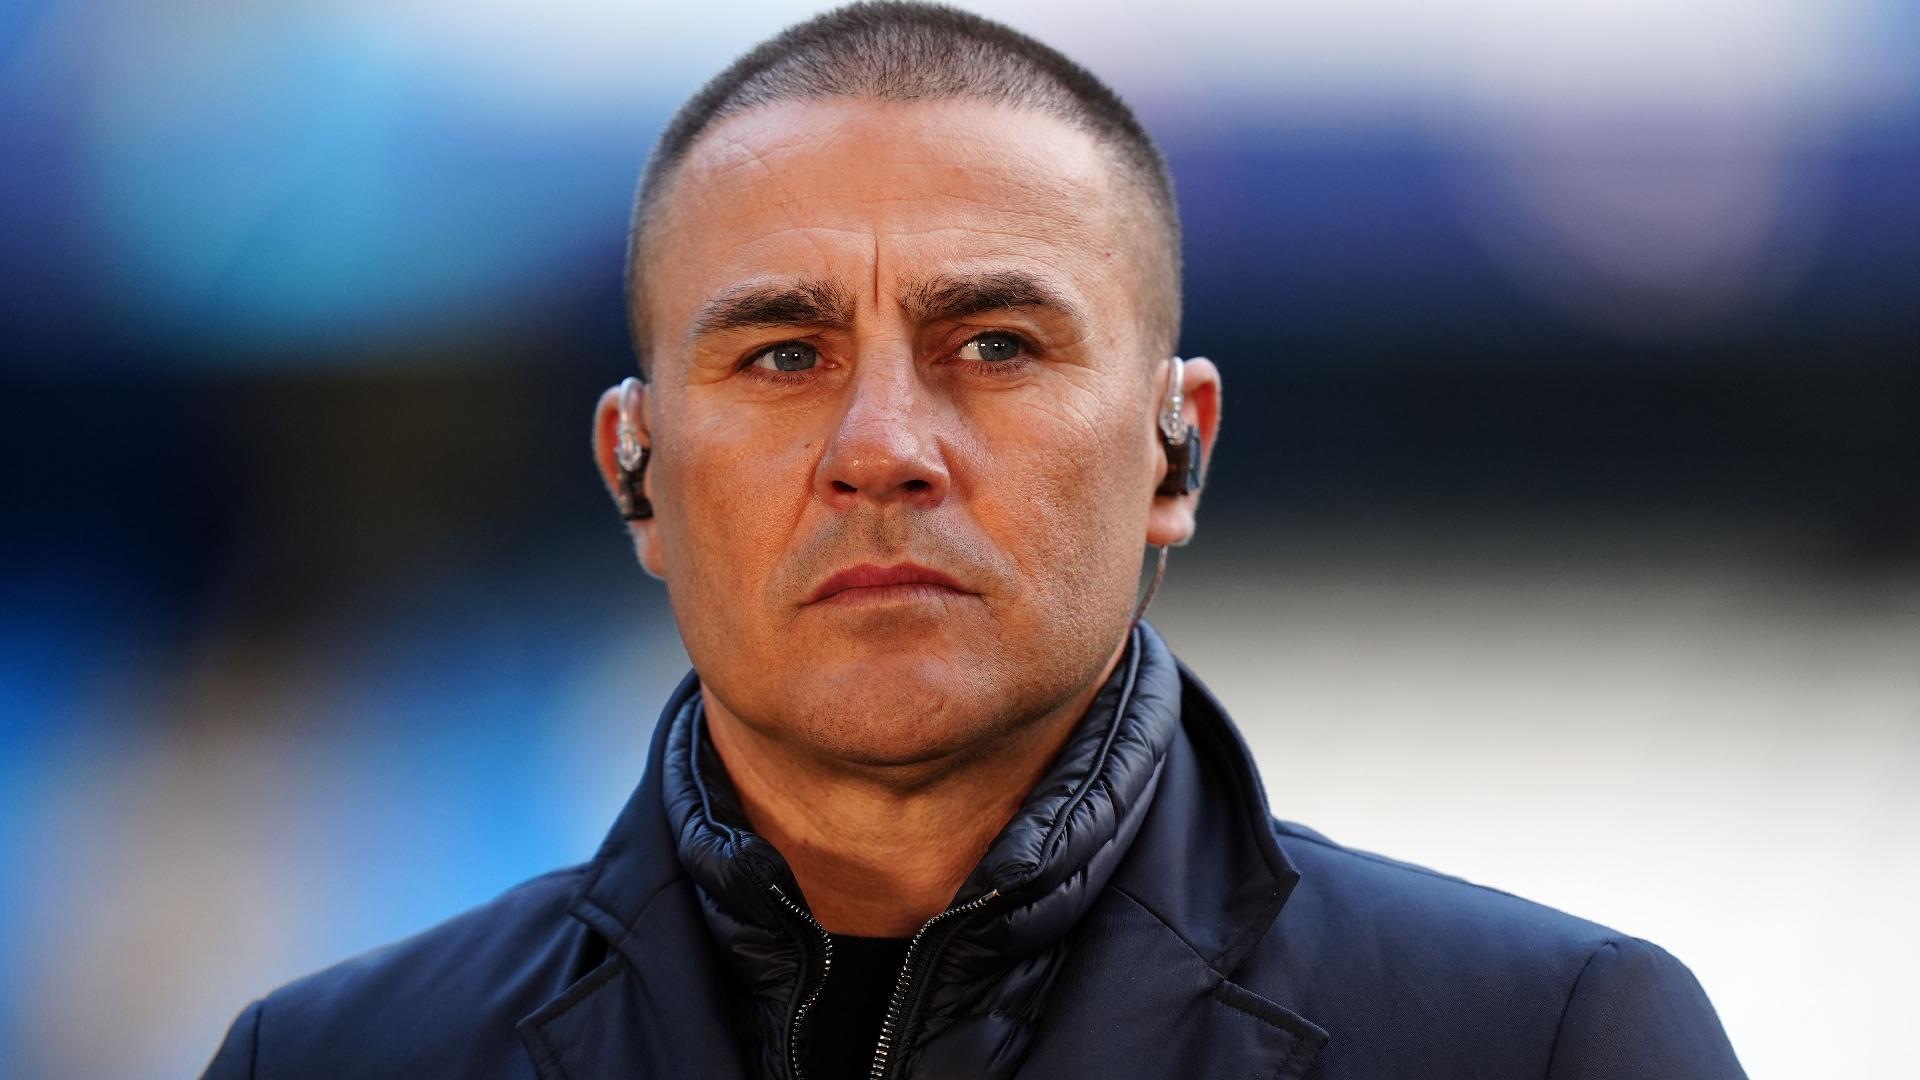 Fabio Cannavaro has six seasons to save Udinese from relegation (Mike Egerton/PA Wire)